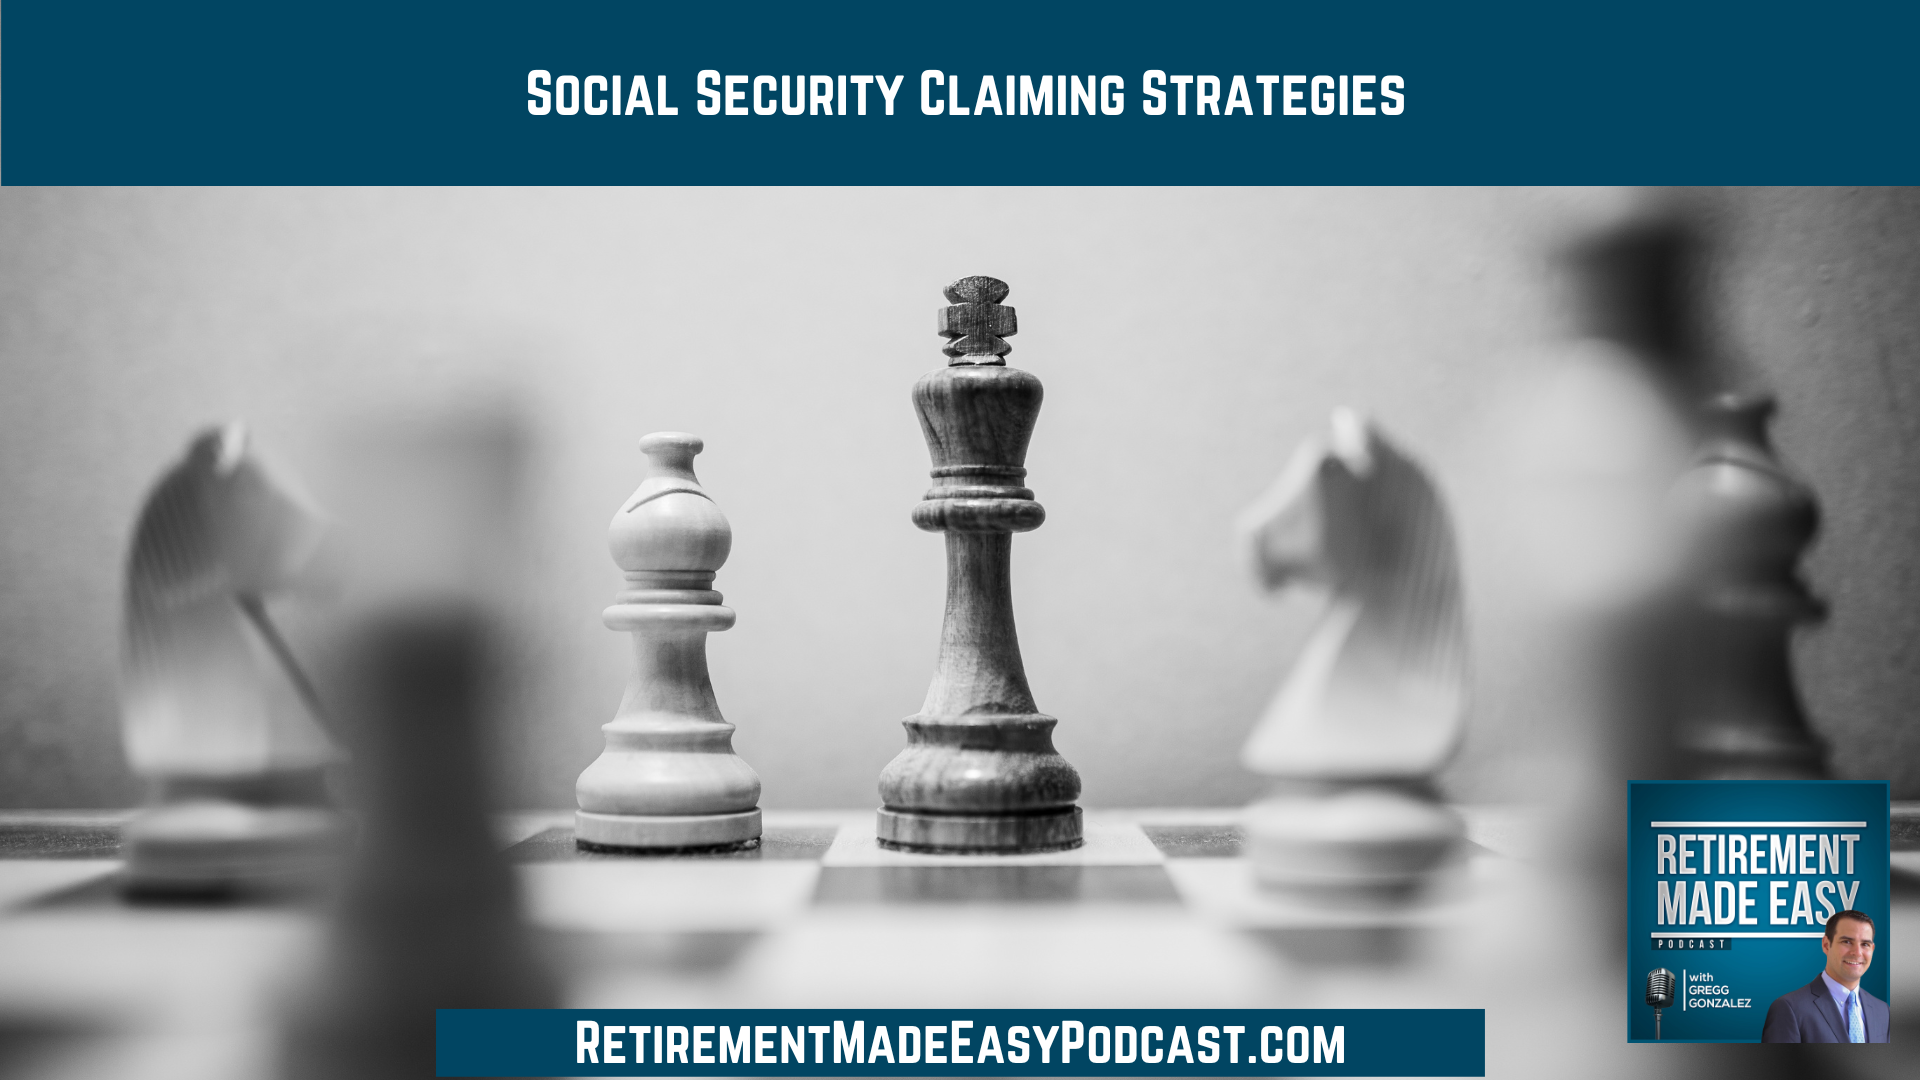 Social Security Claiming Strategies